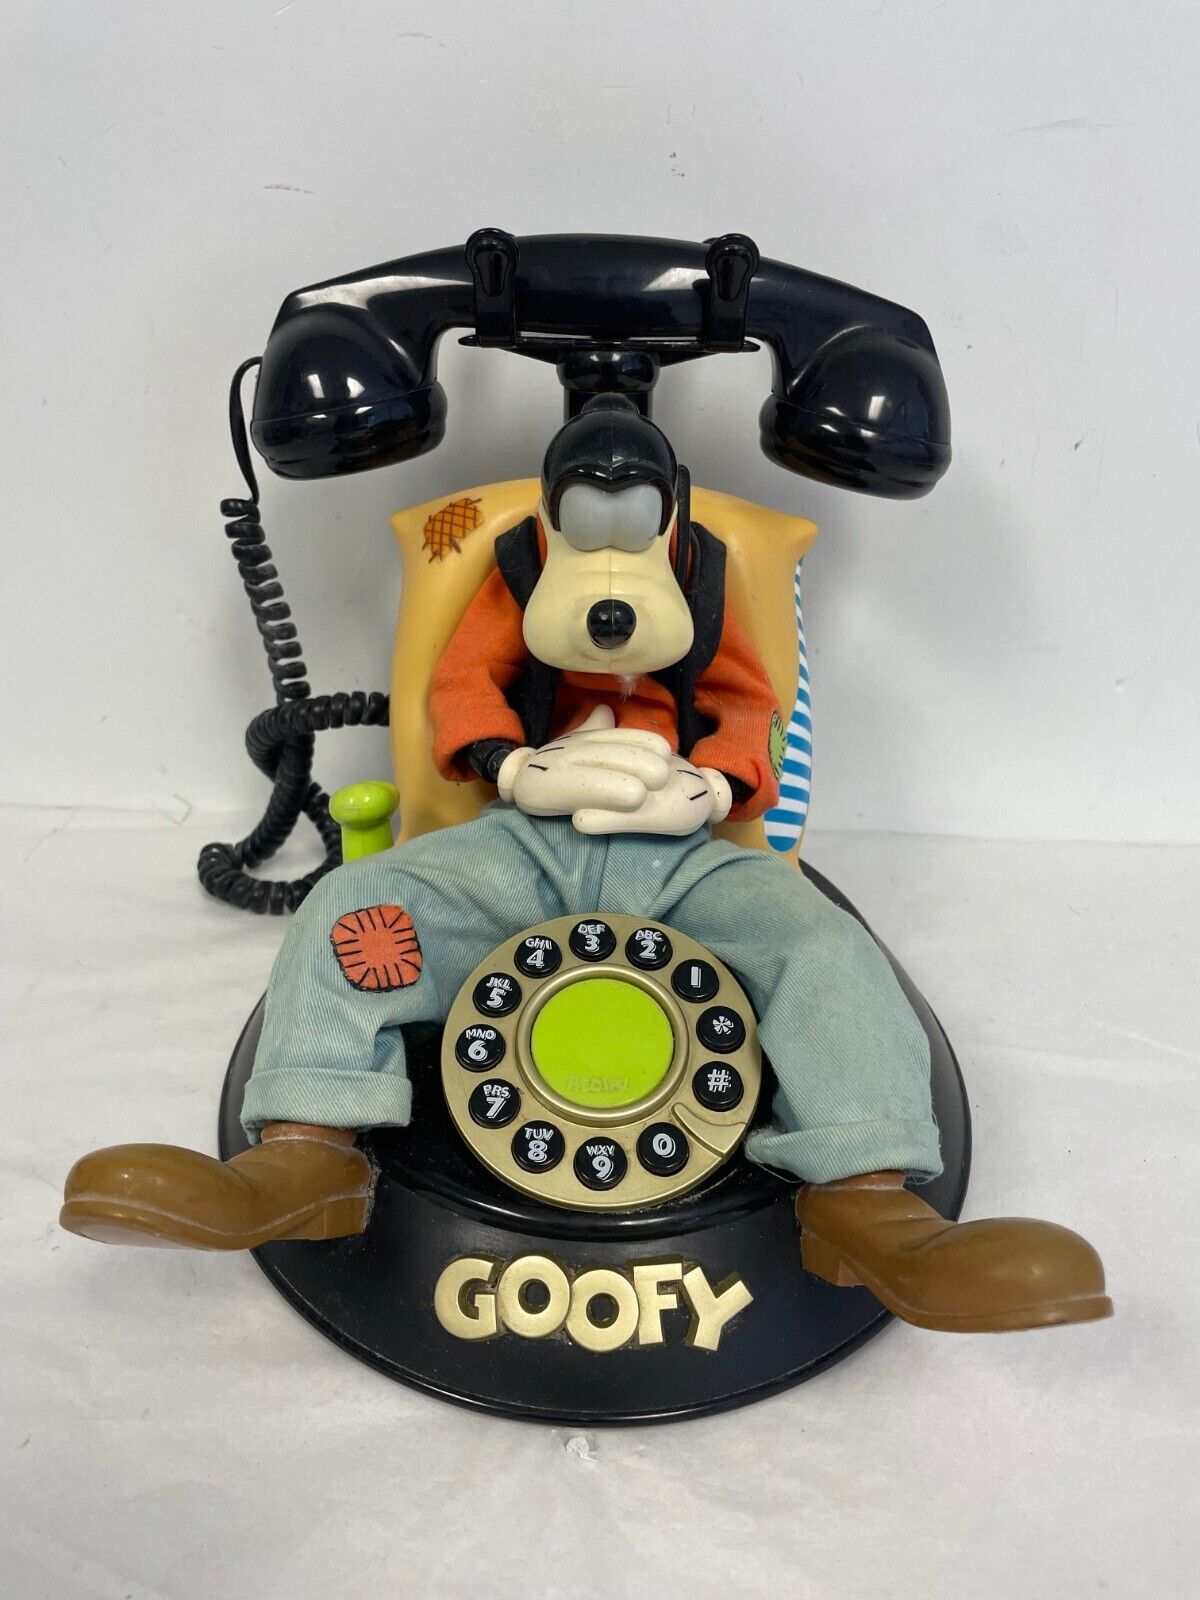 Vintage Disney Goofy's Animated Talking Telephone -TESTED WORKS Gr8 cond.